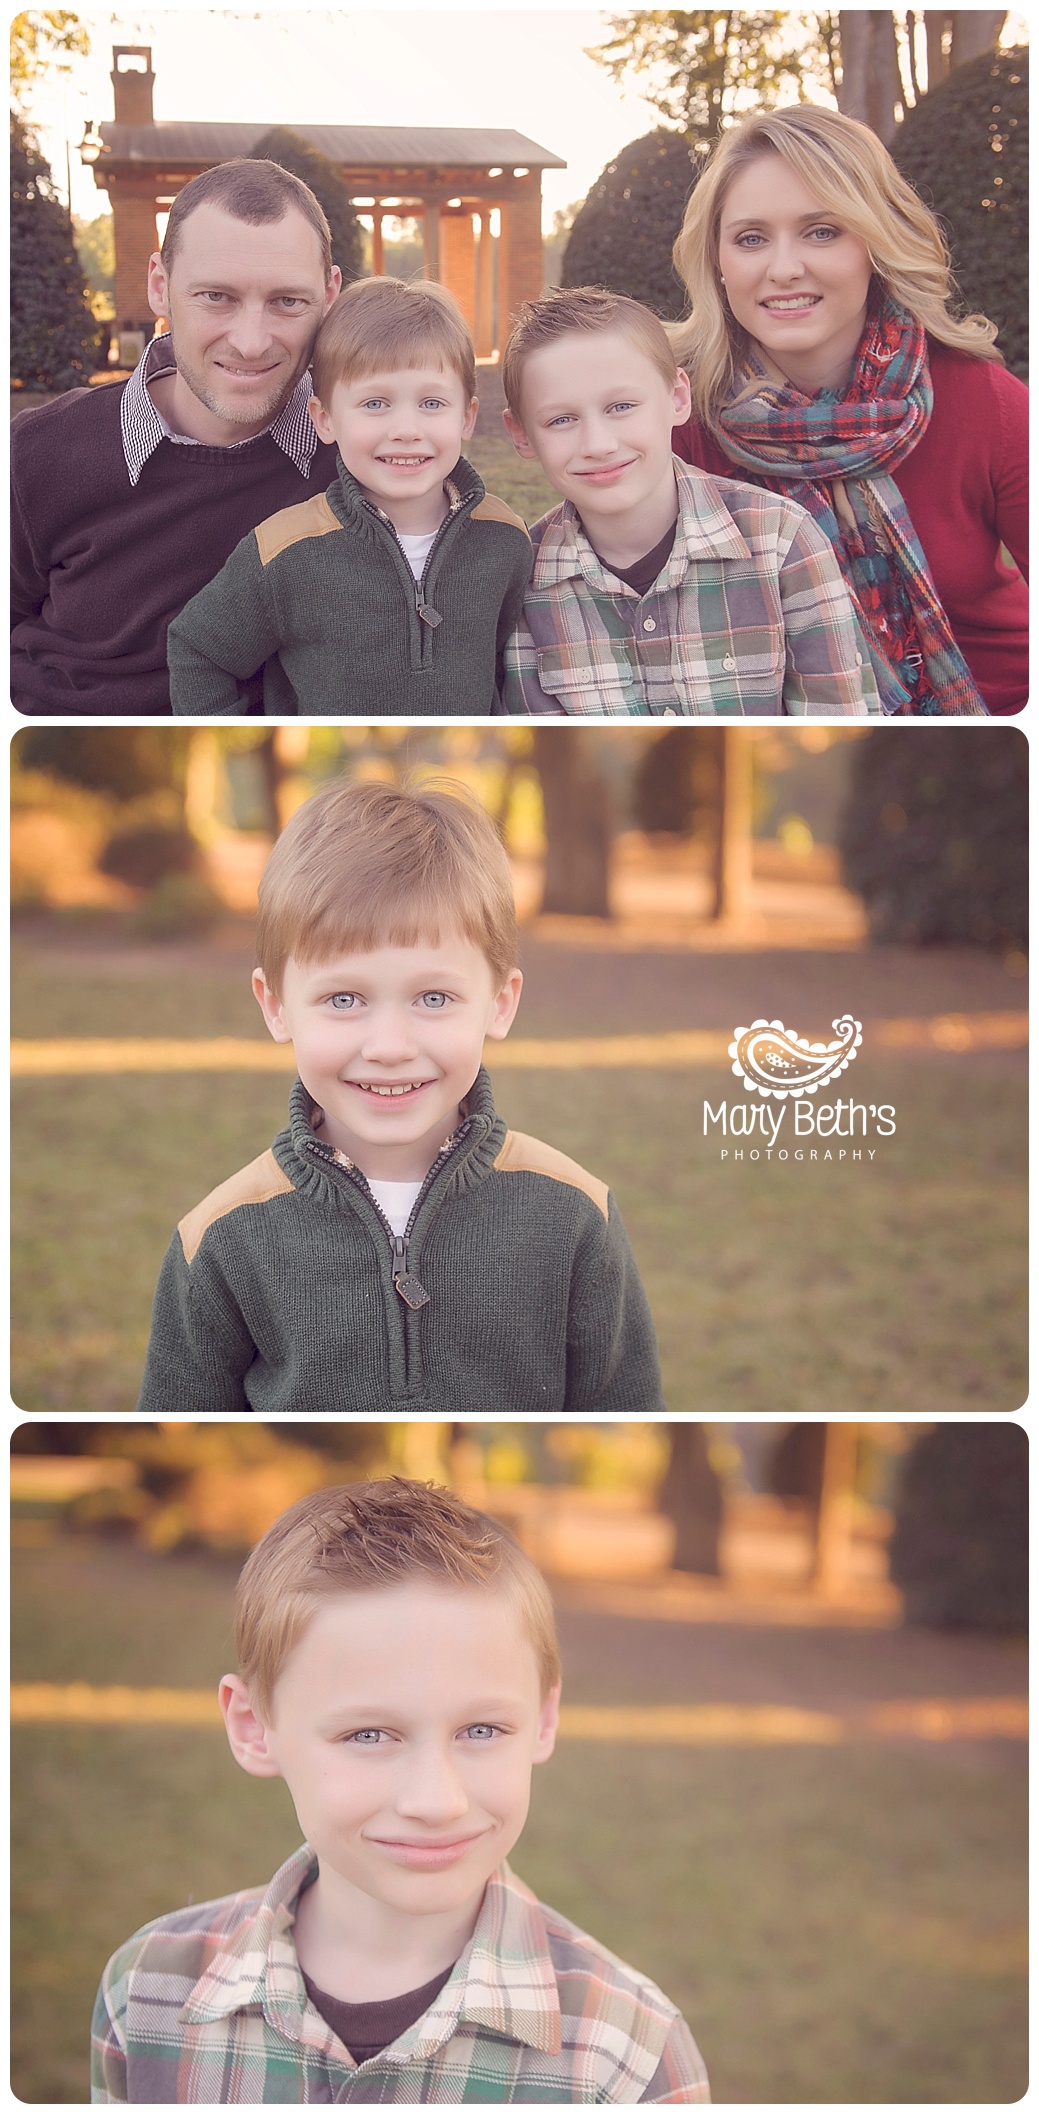 Three images of a family portrait session in a field.